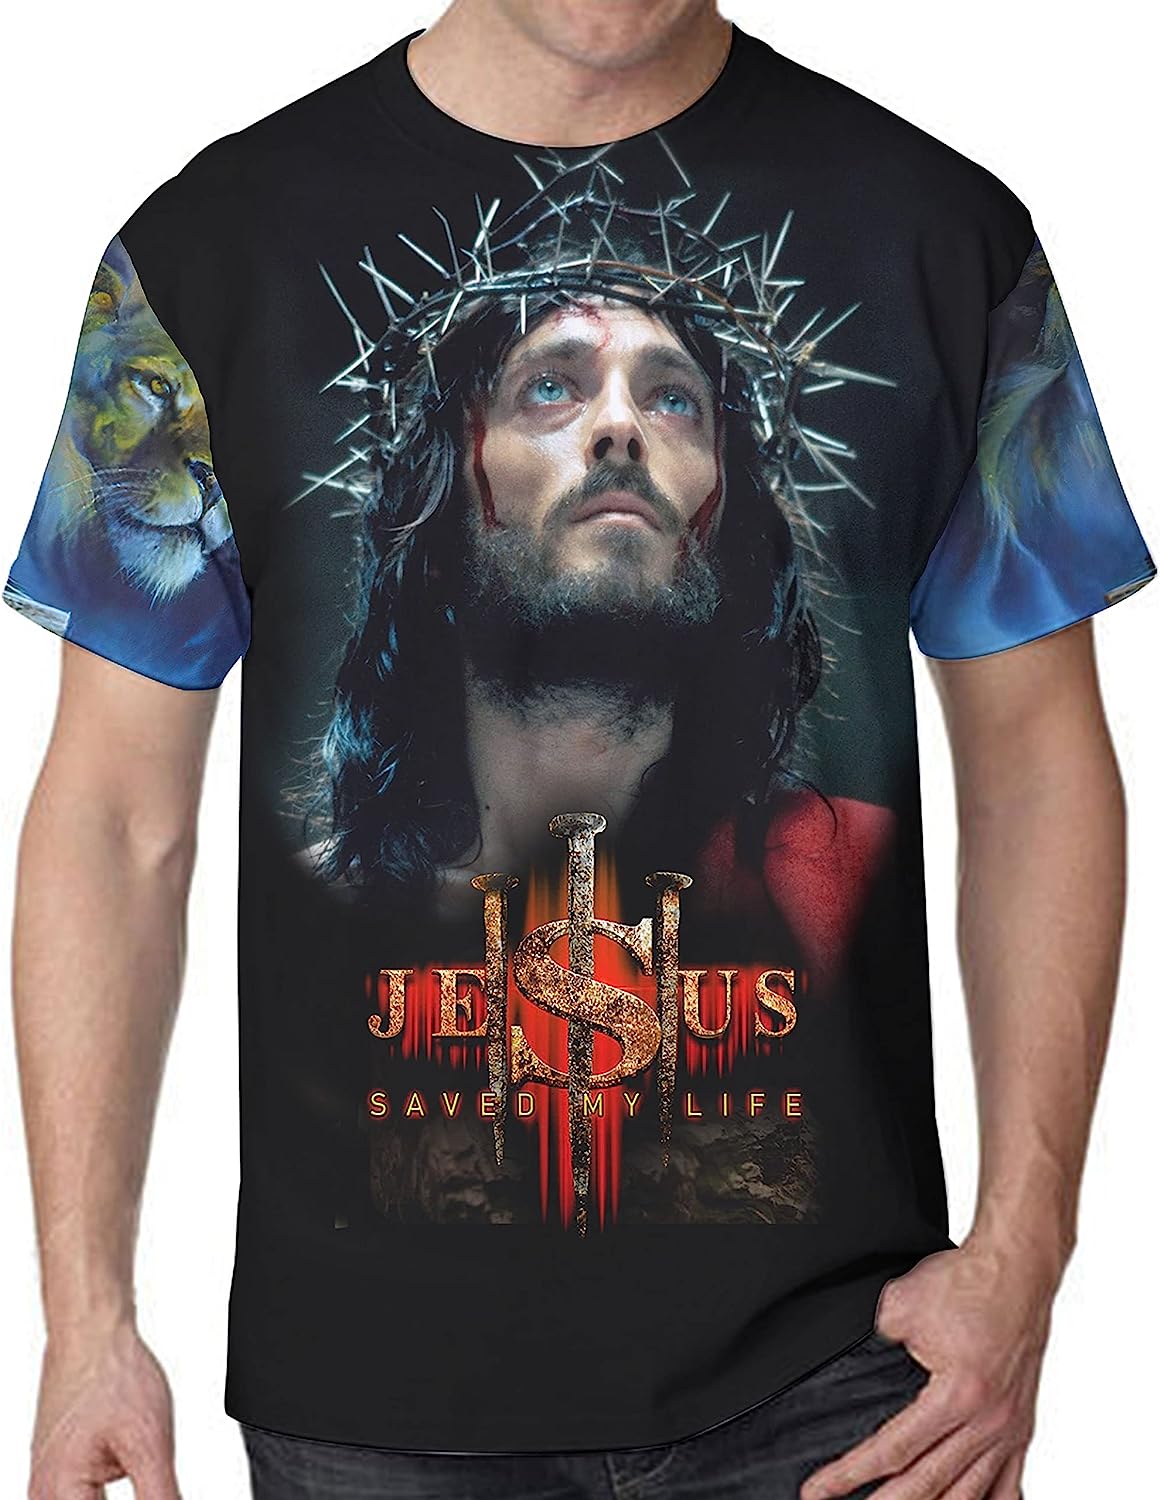 Jesus Crown Of Thorns Jesus Saved My Life All Over Printed 3D T Shirt - Christian Shirts for Men Women